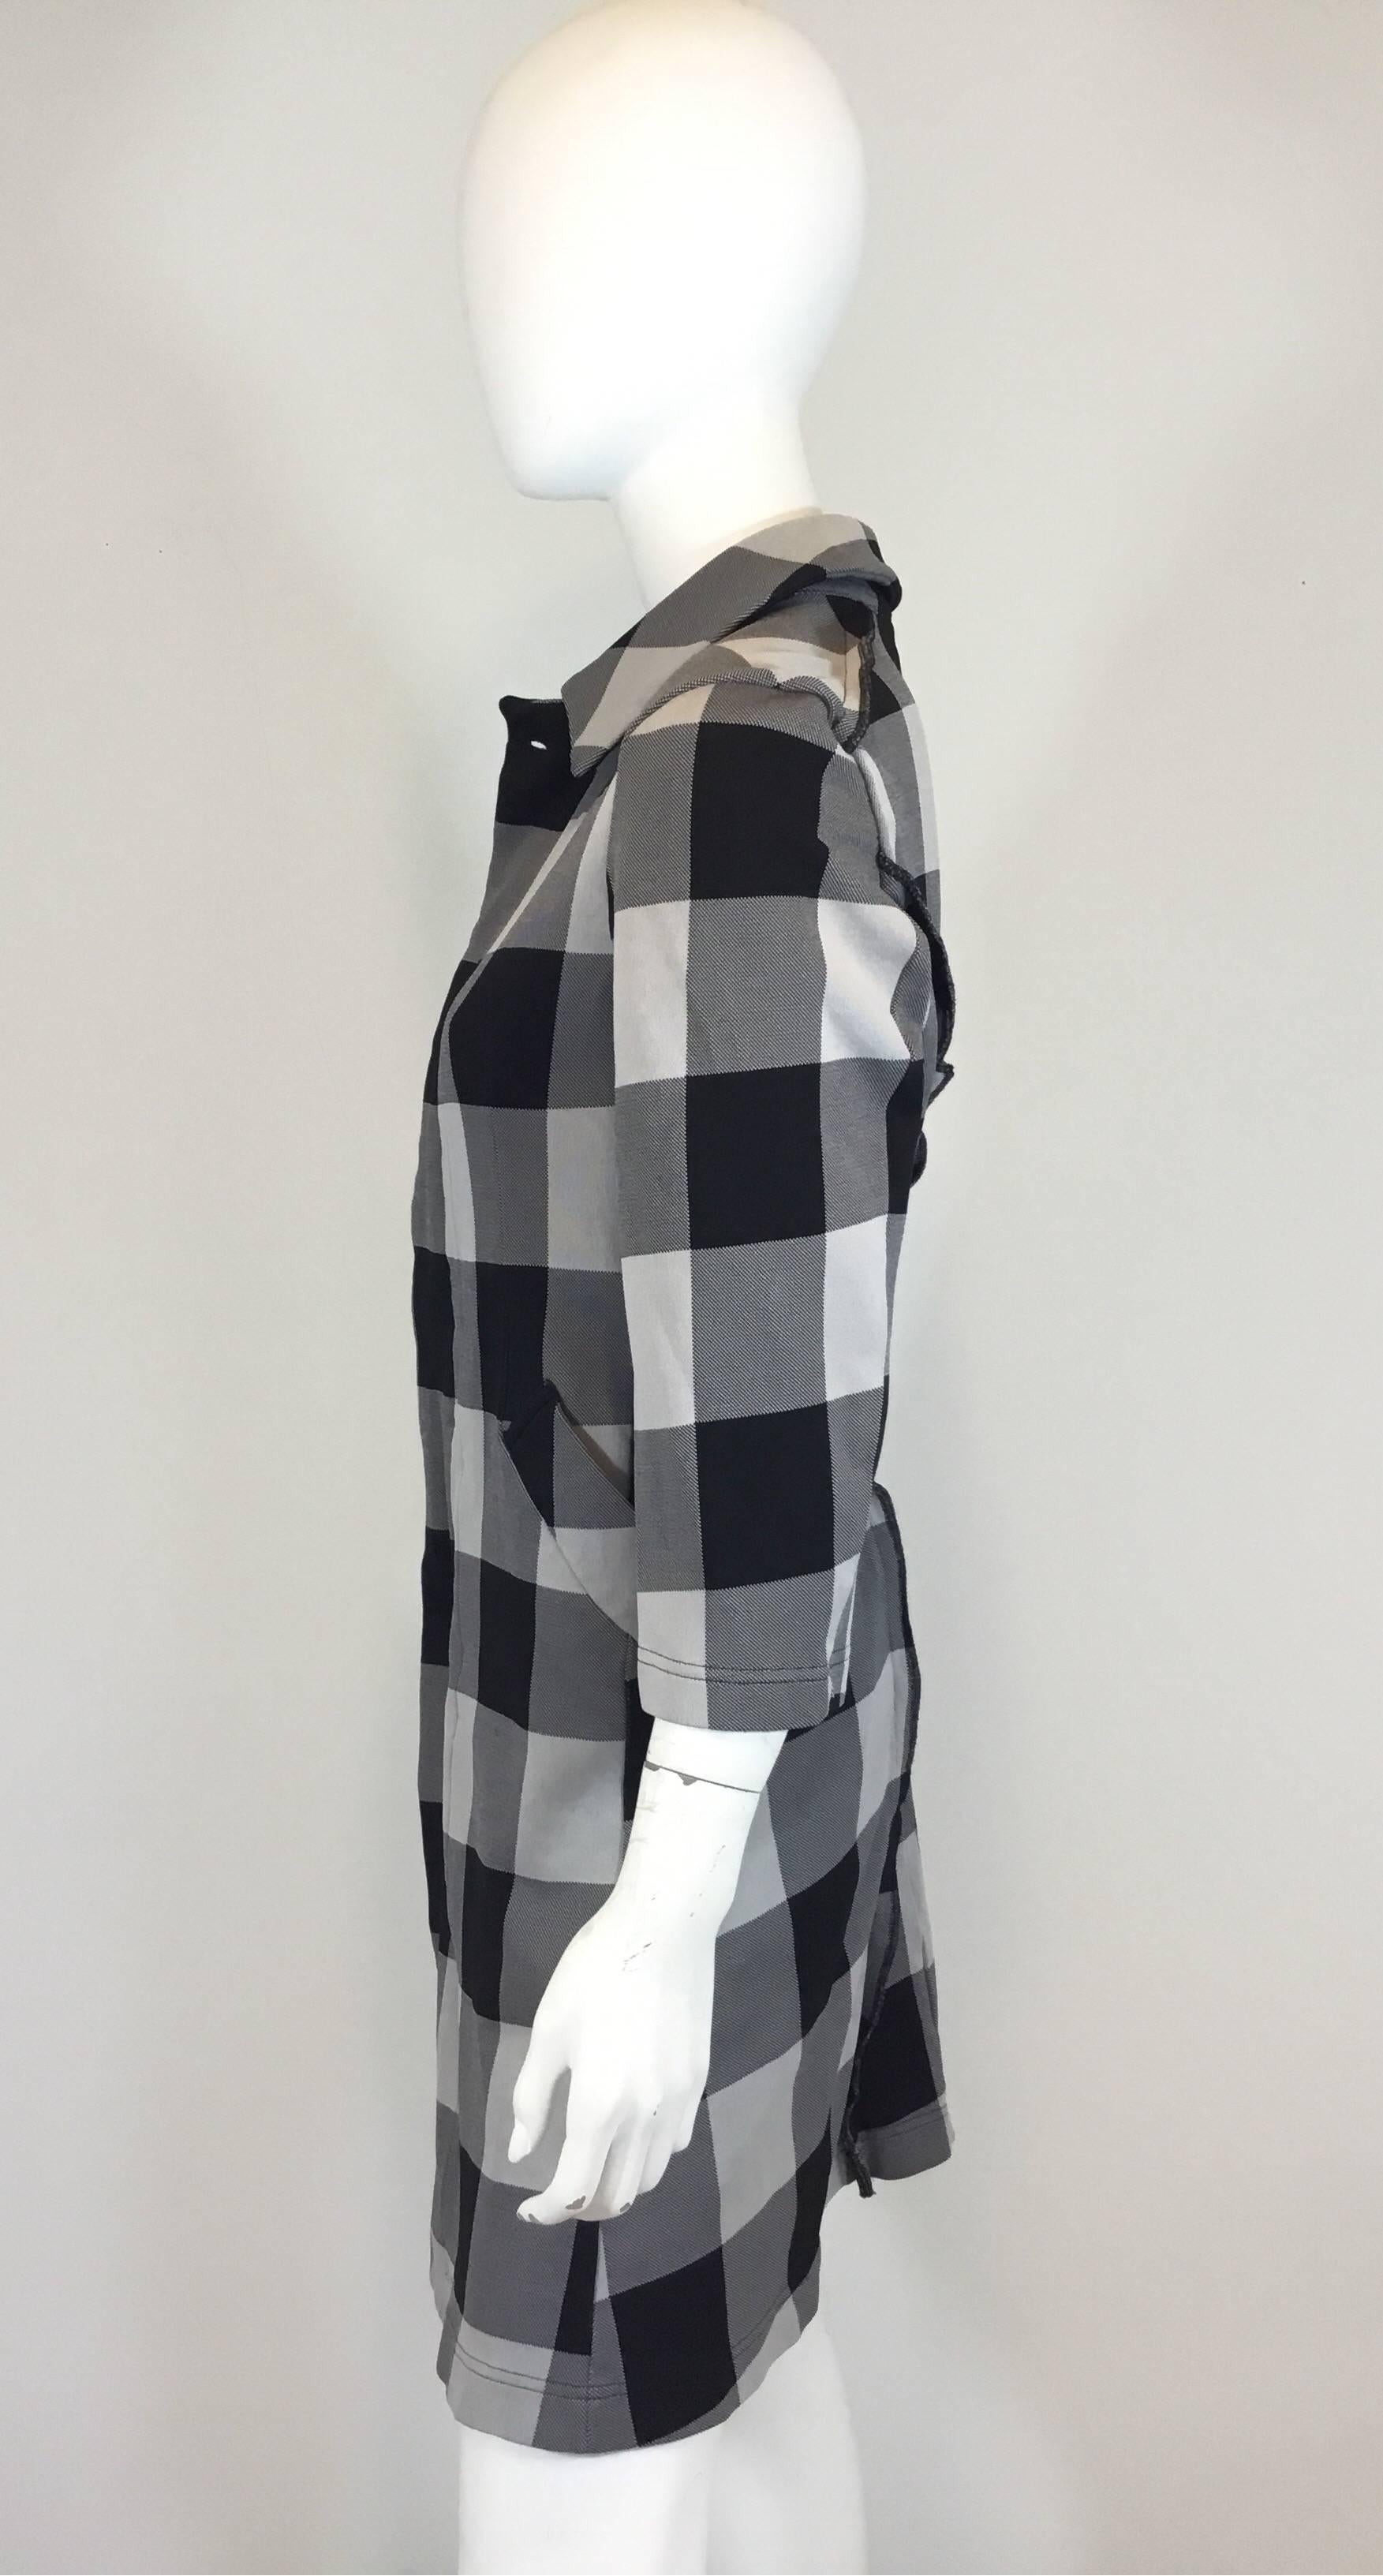 Comme des Garçons grey and black plaid Checkered patterned jacket with concealed button closures at the front and two pockets at the hips. Draped garment with unique style lines. Jacket made with 100% polyester and made in Japan. Excellent